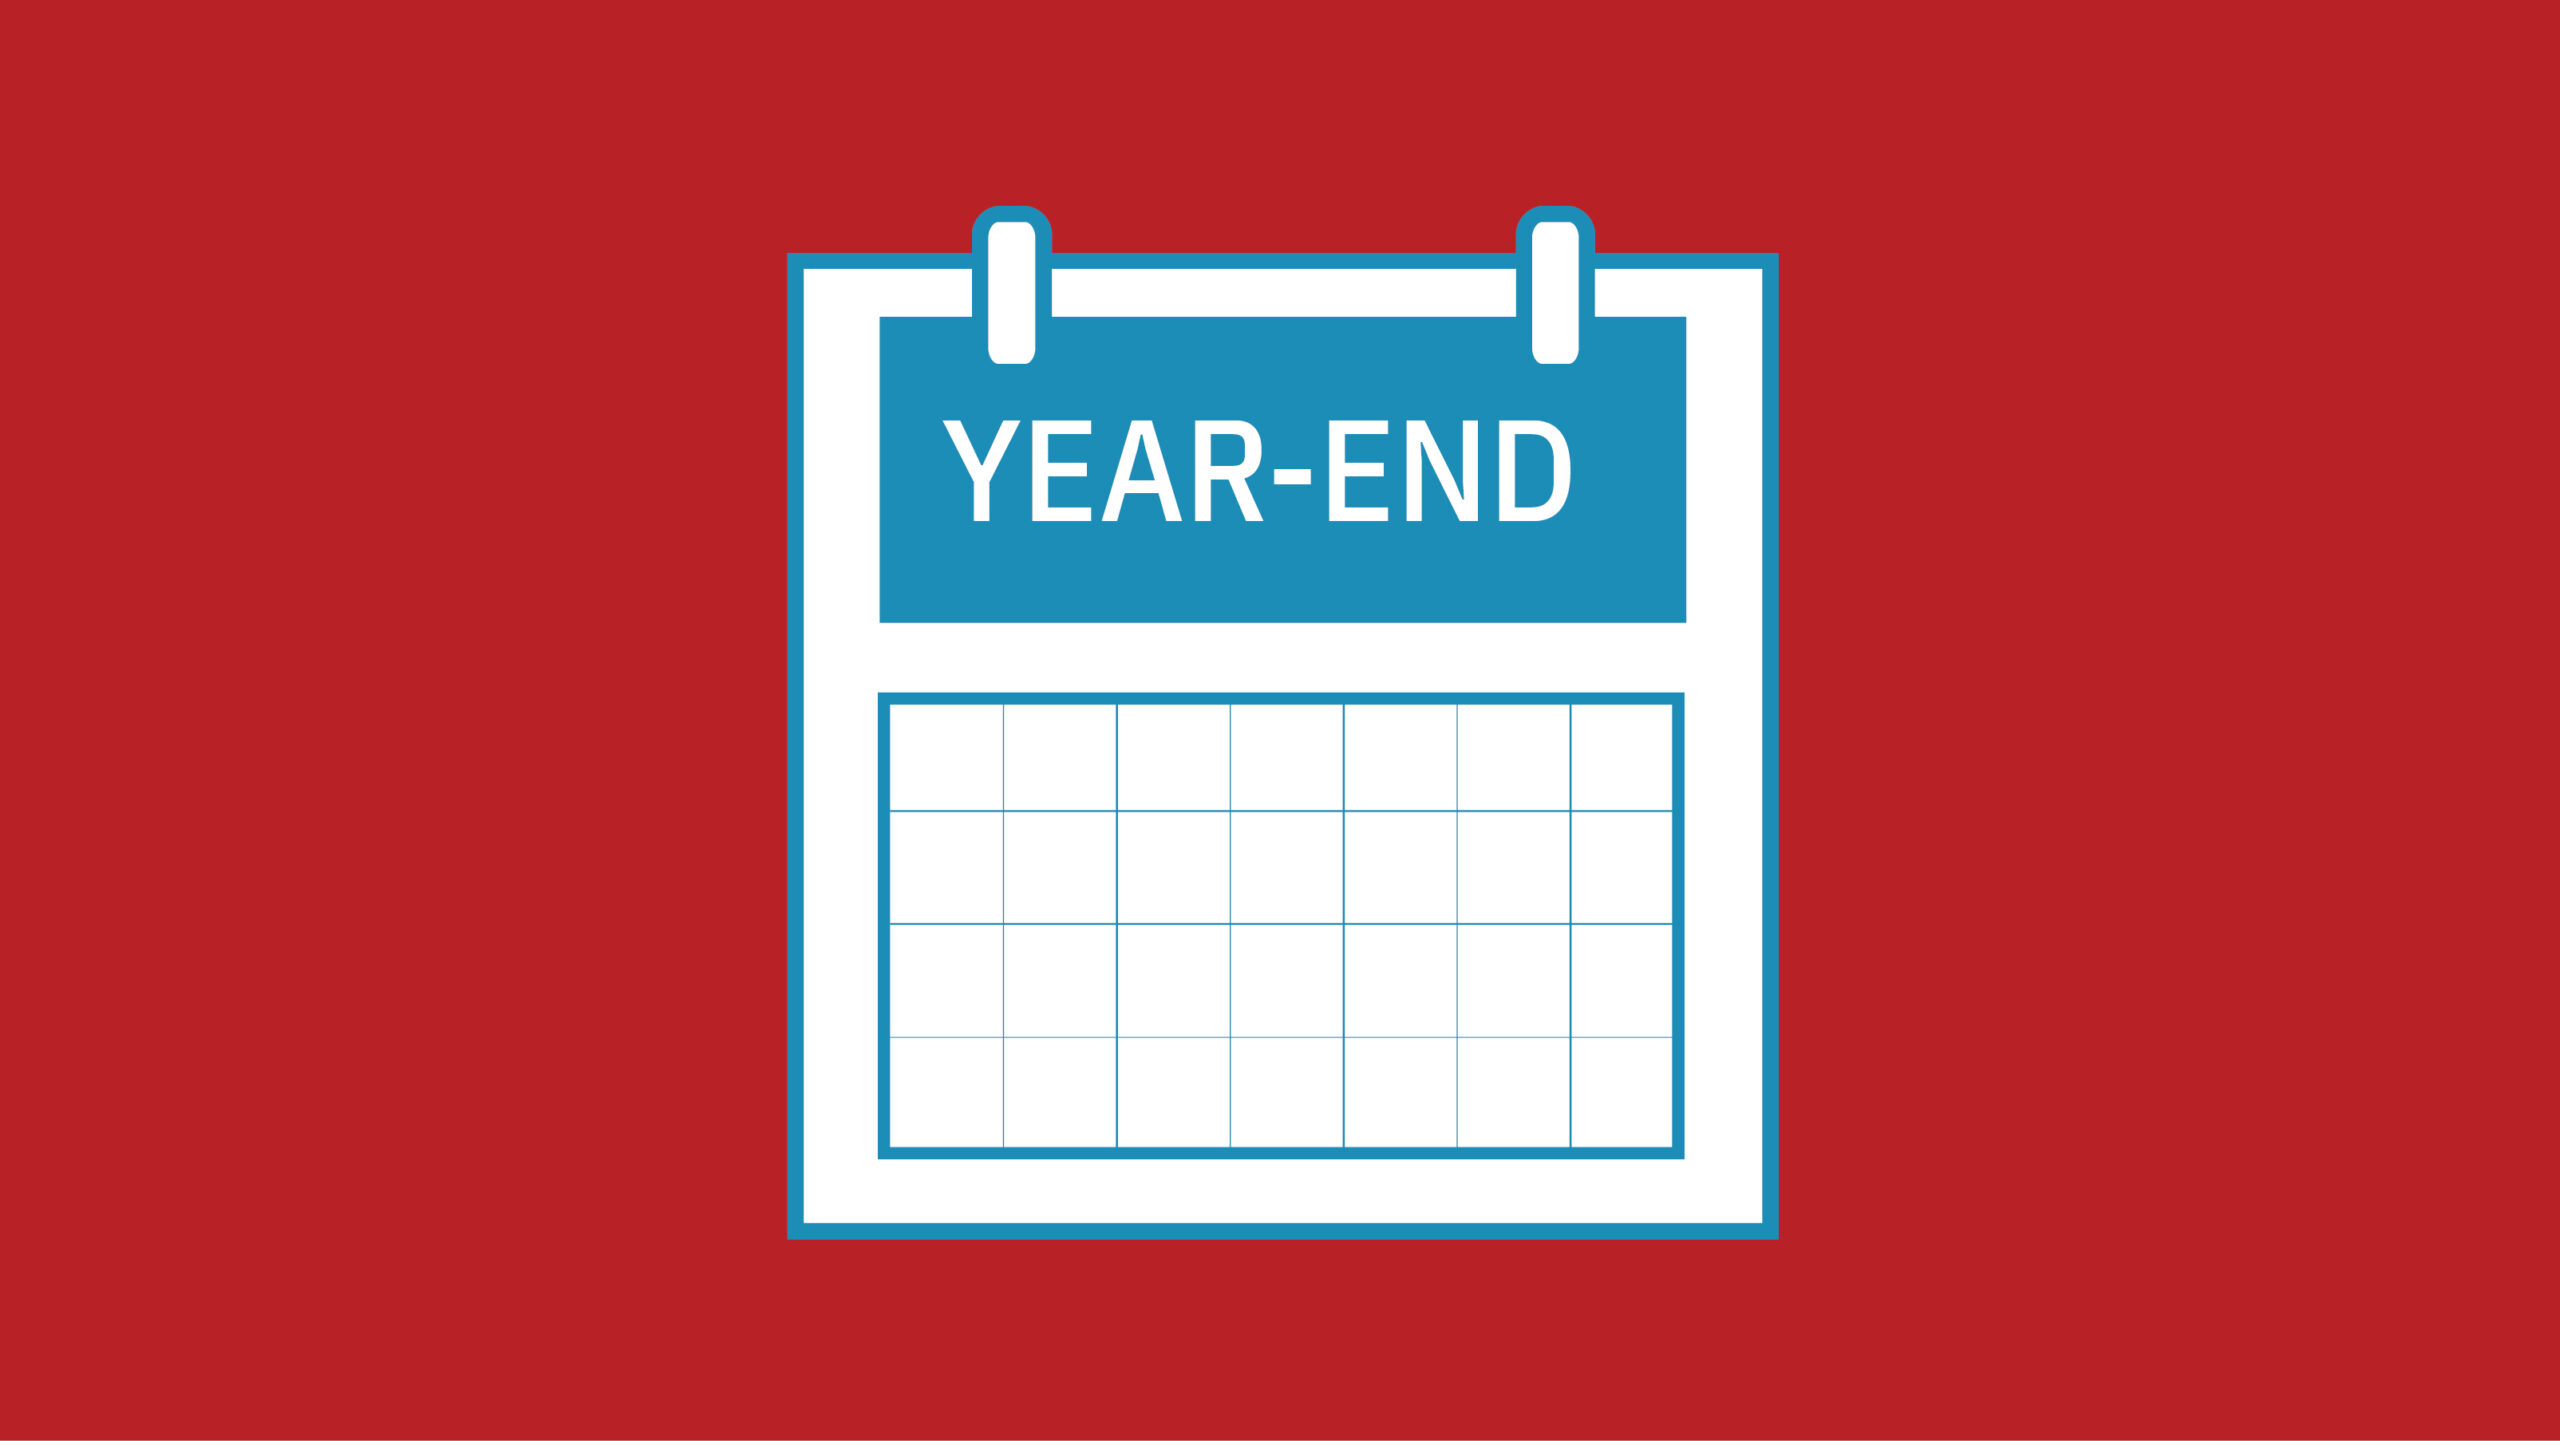 image of calendar with word "year end"